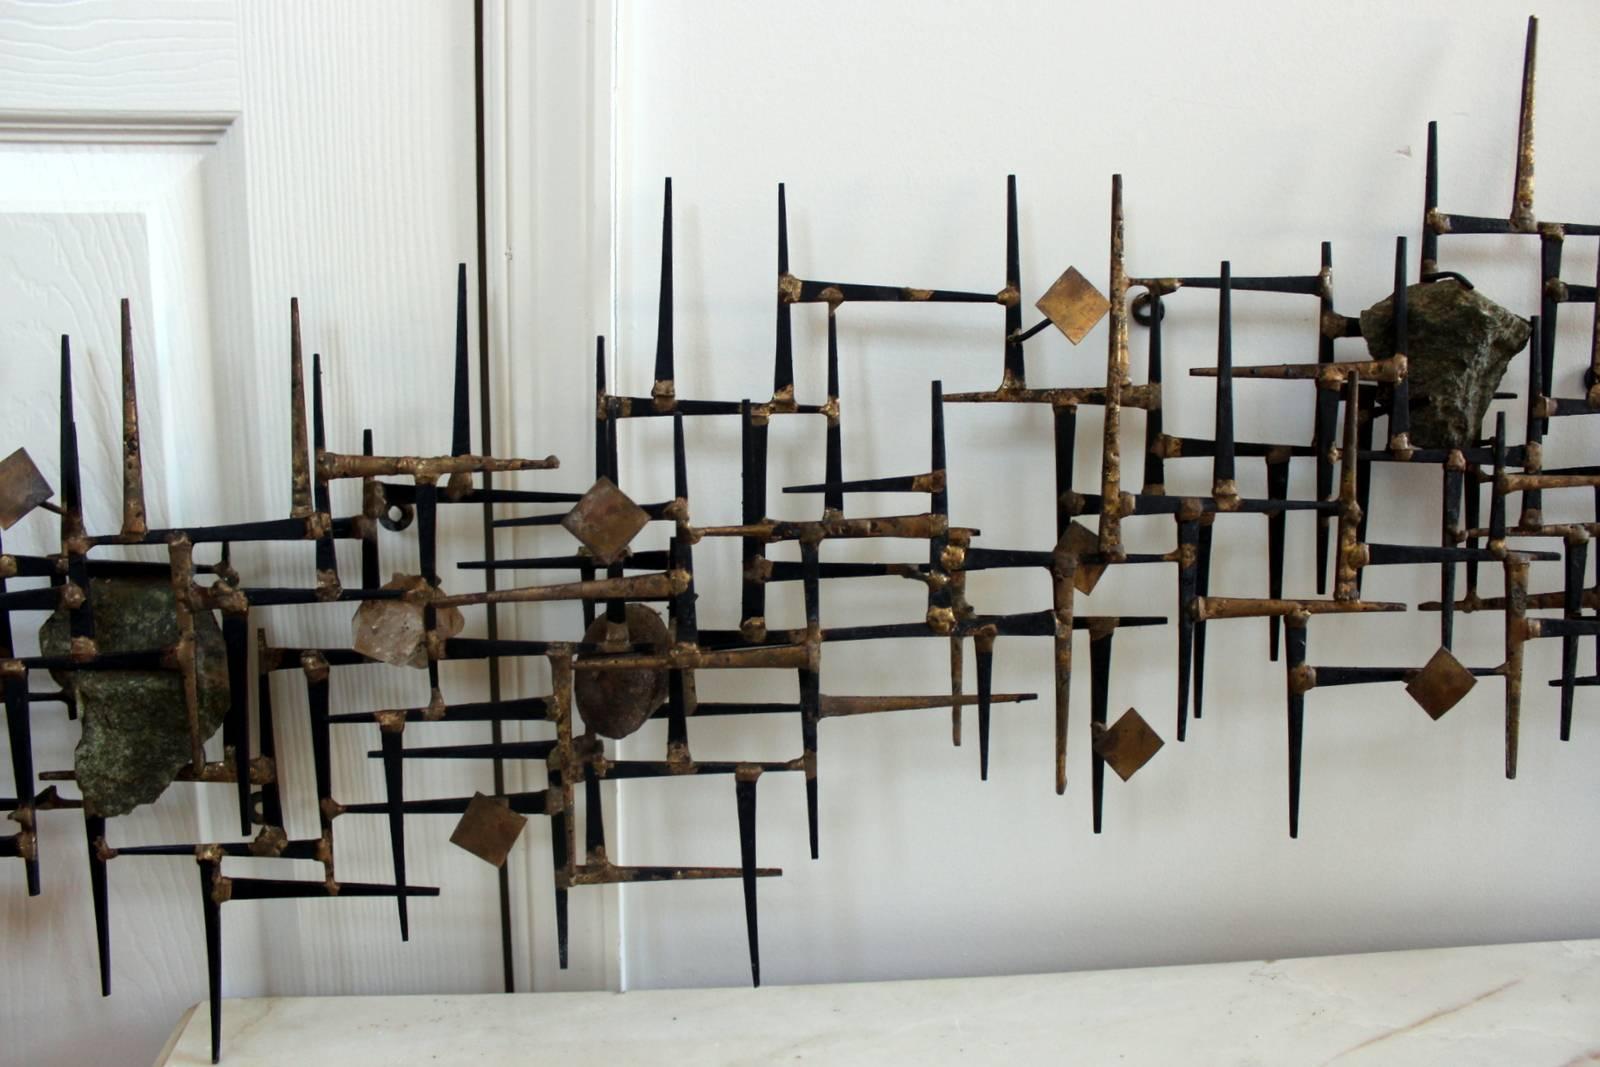 Welded Brutalist Abstract Wall Mount Sculpture with Quartz Pieces by Jim Gary